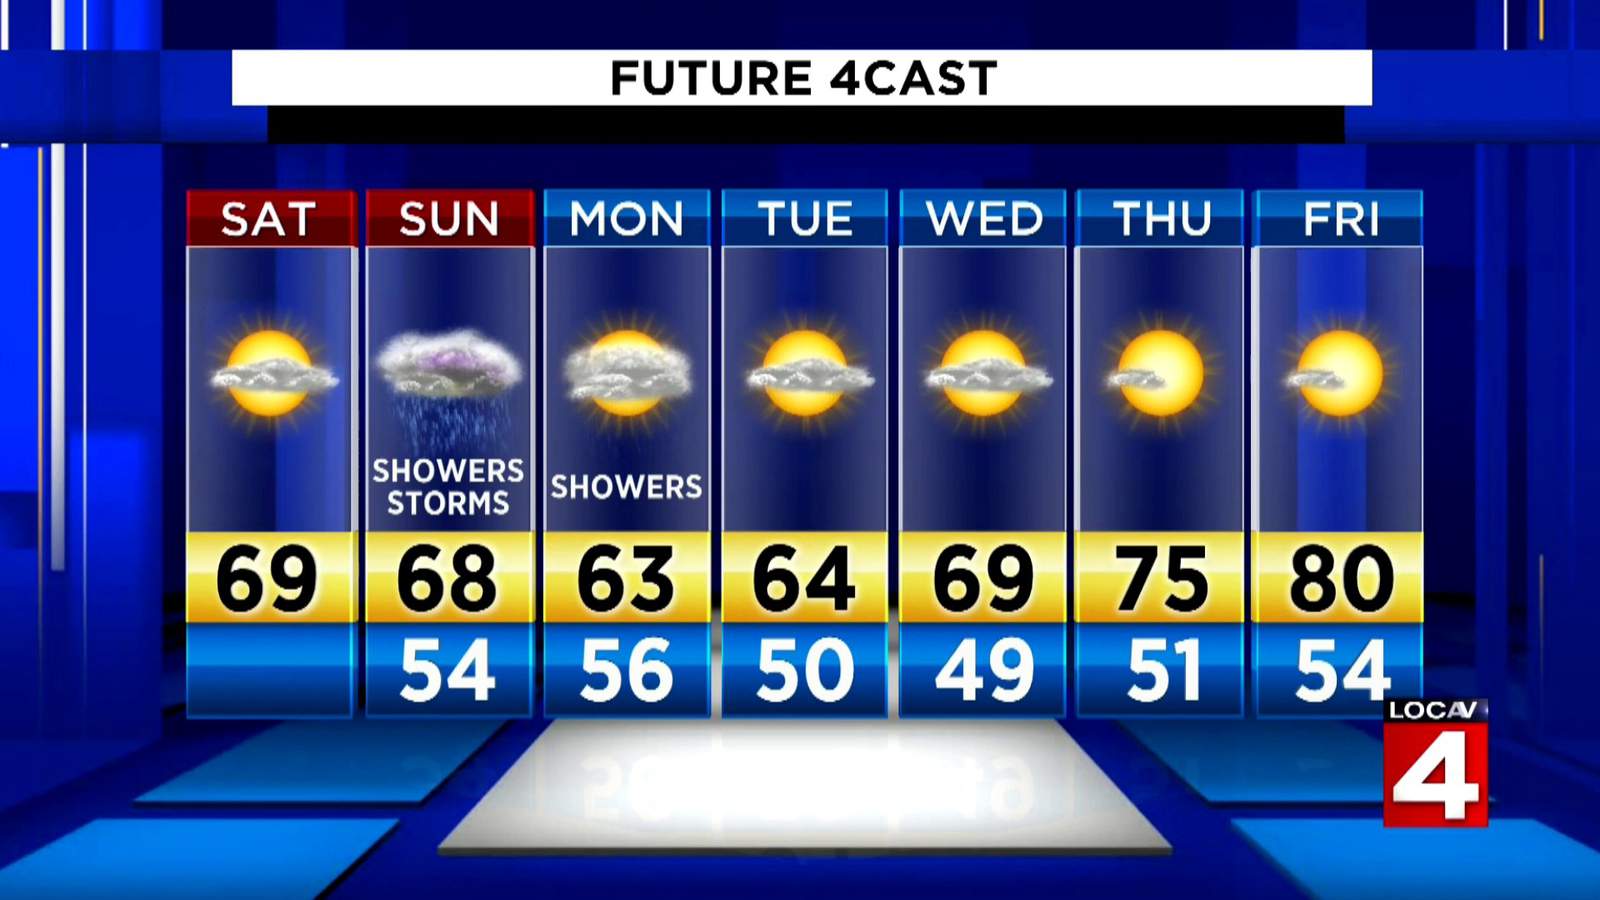 Metro Detroit weather: Saturday afternoon mostly sunny with highs in the upper 60s